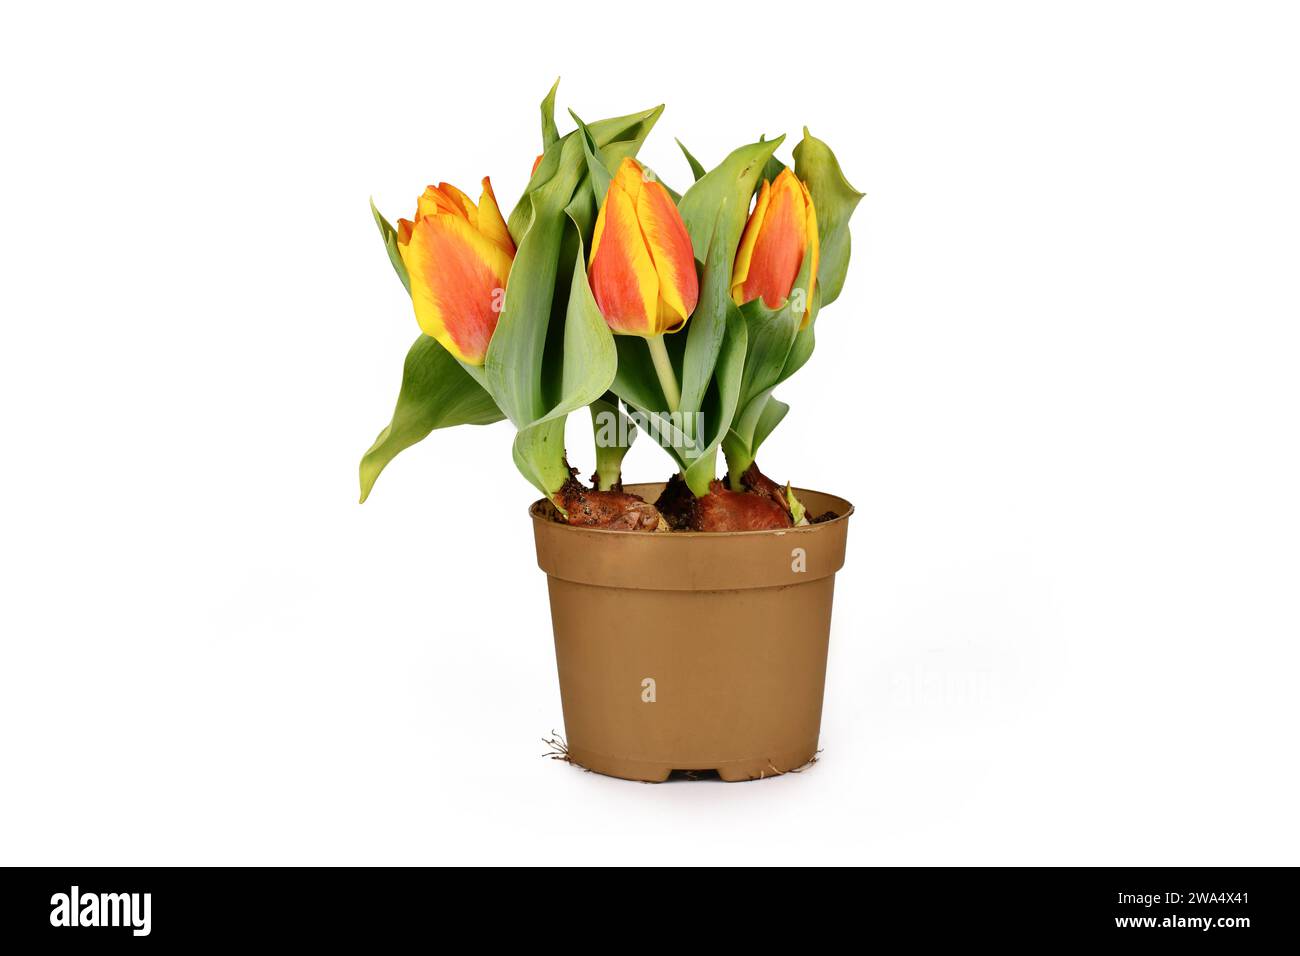 Flower pot with orange and yellow 'Tulipa Flair' tulip spring flowers on white background Stock Photo